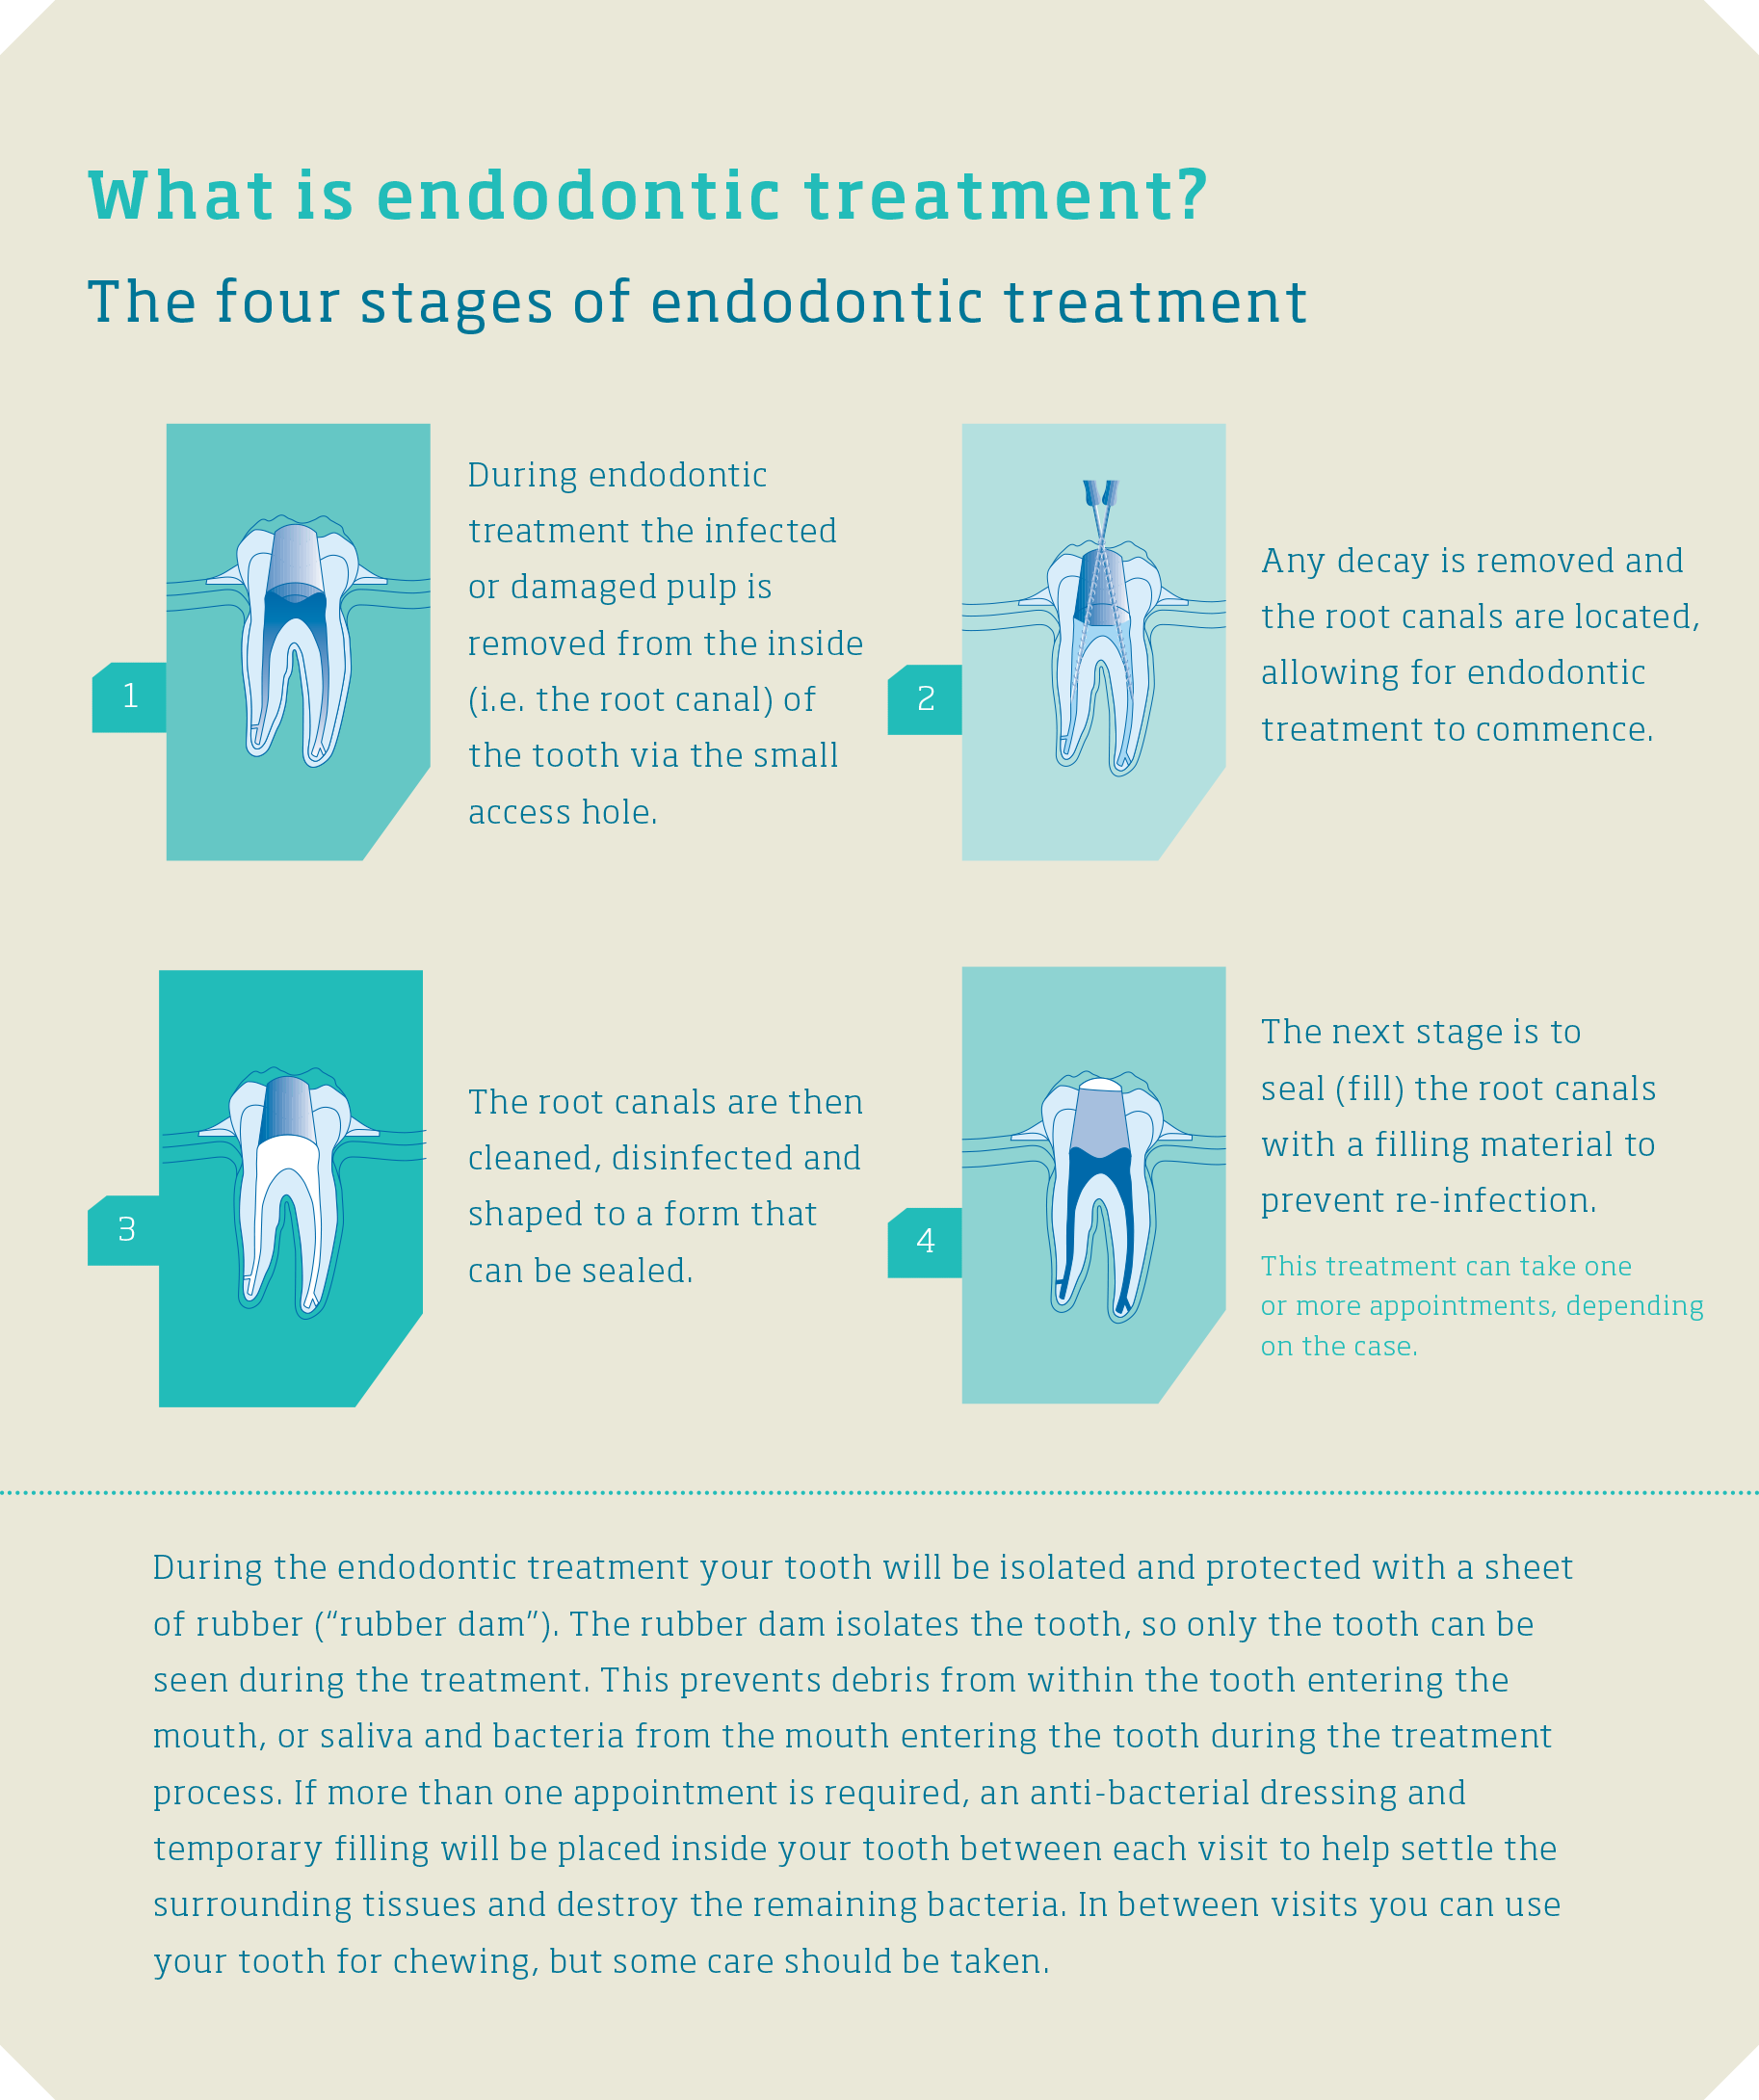 The four stages of endodontic treatment